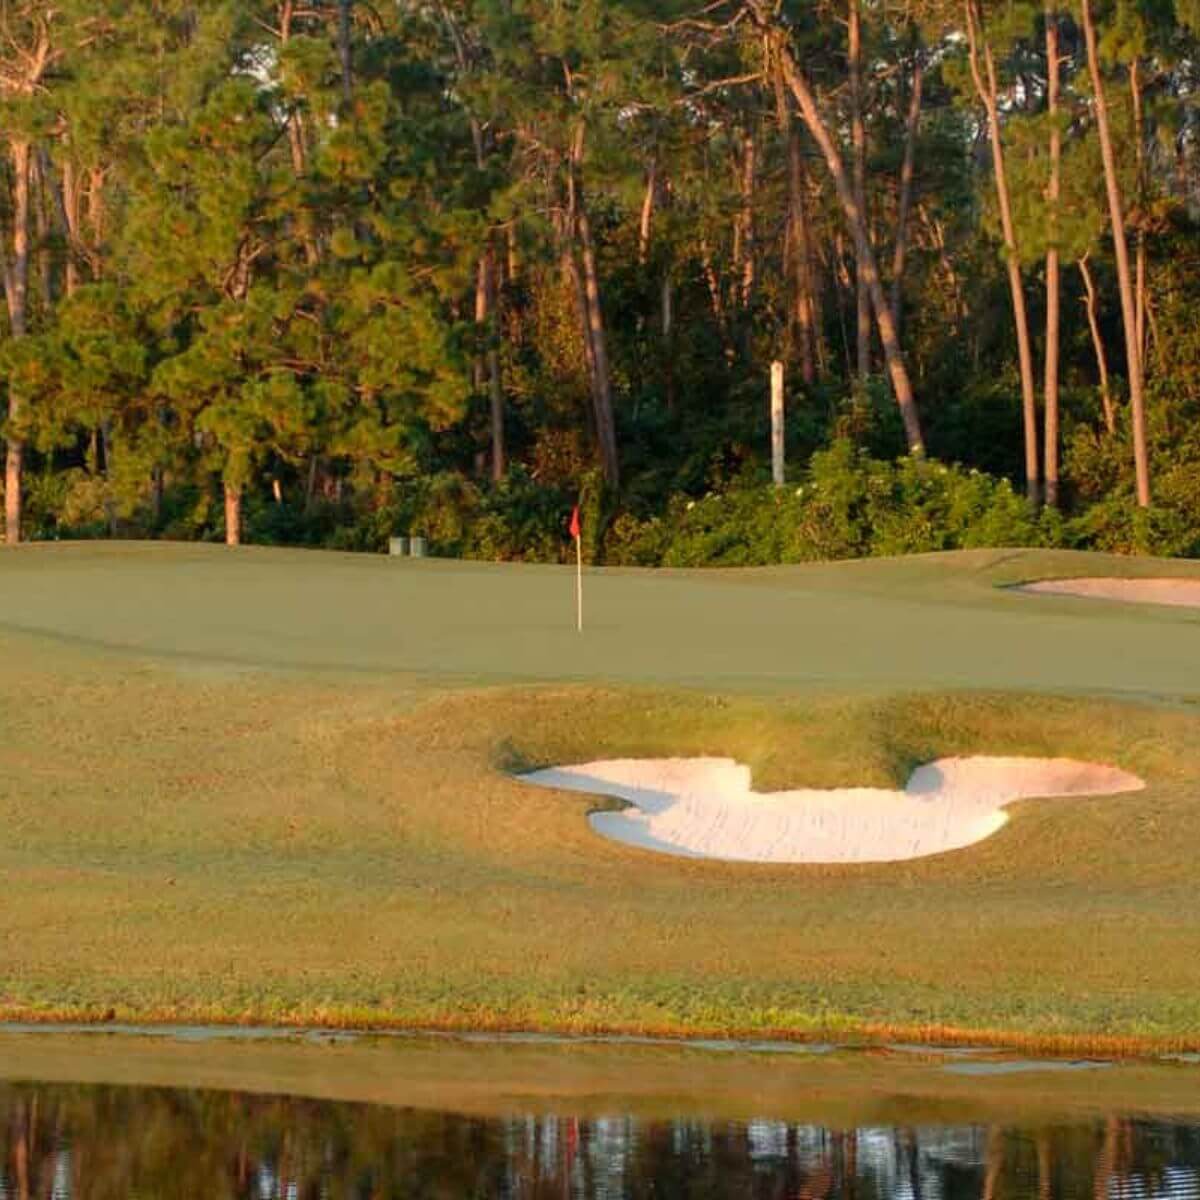 Photo of a Mickey head shaped sand trap at a golf course at Disney World